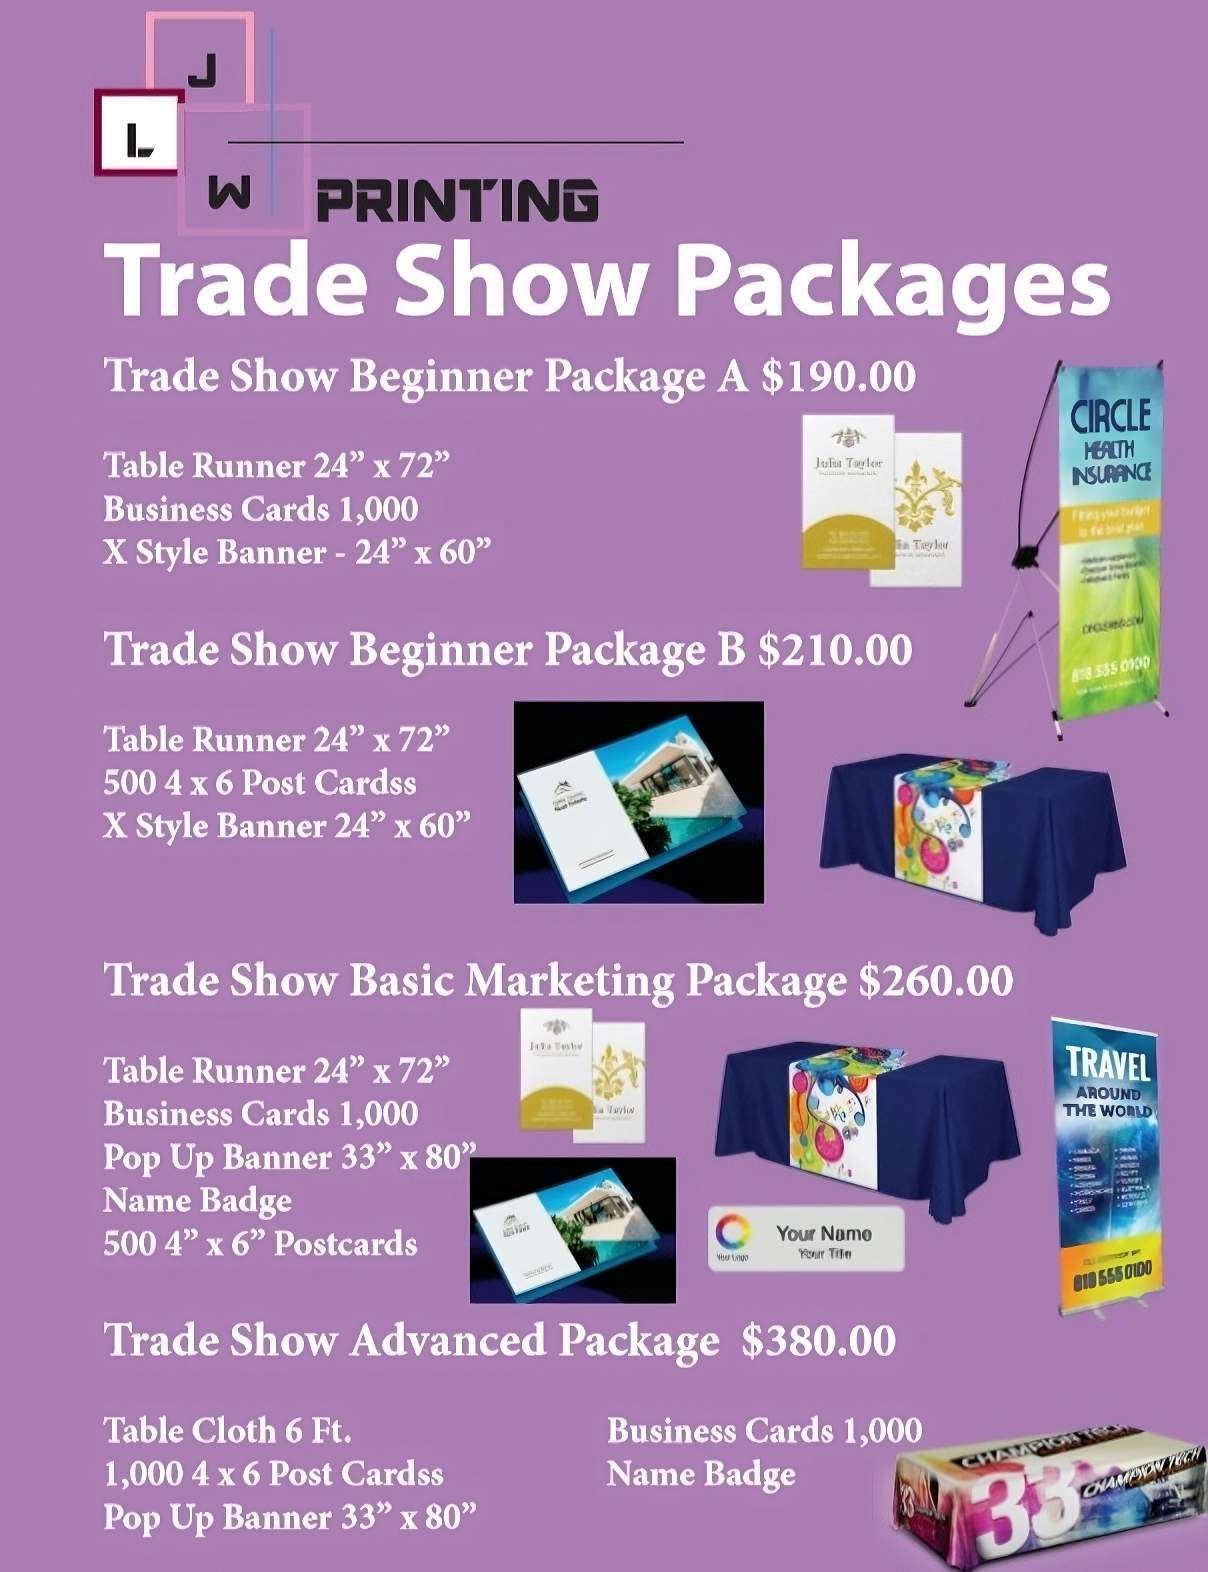 JLW Printing trade show packages